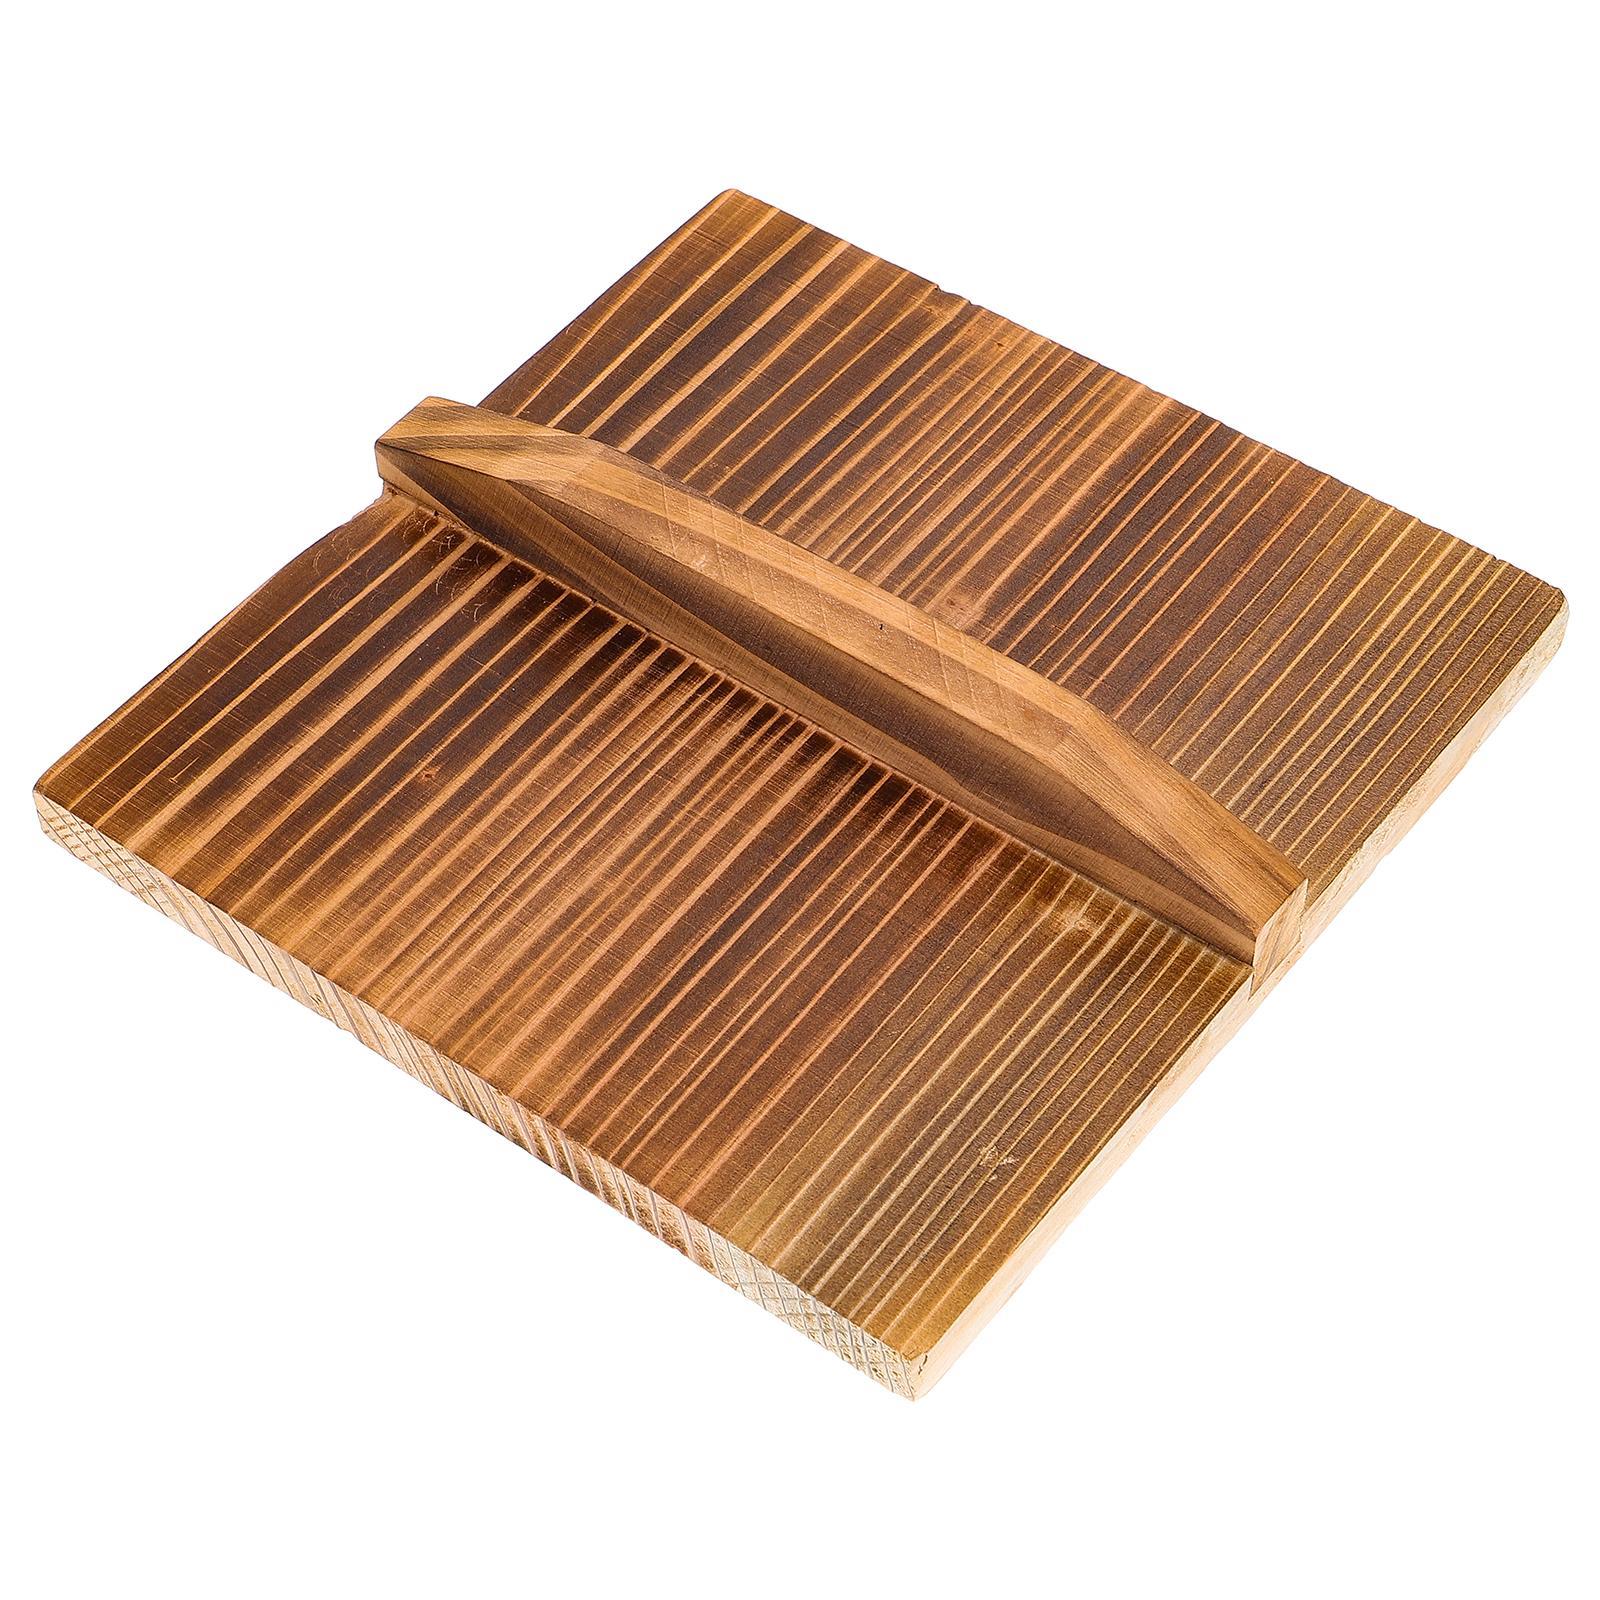 Camping Pans Household Gadgets Home Square Lid Steamer Japanese Bbq Wooden Cooking Utensils